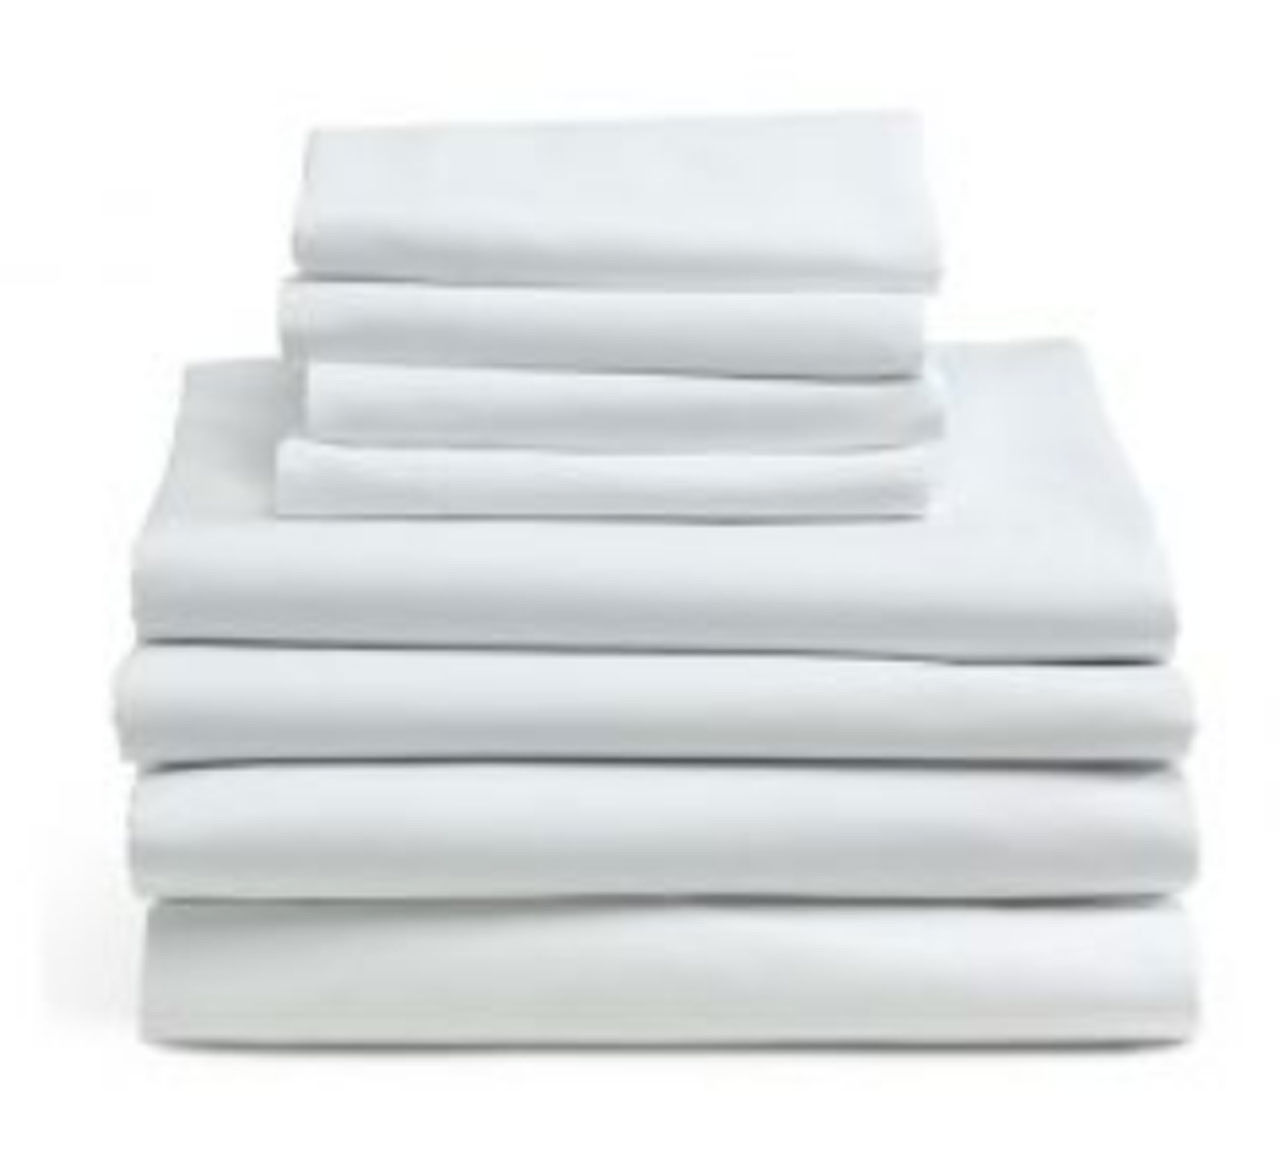 What is the material composition of the Royal Star wholesale T-180 Hospitality Bed Sheets?